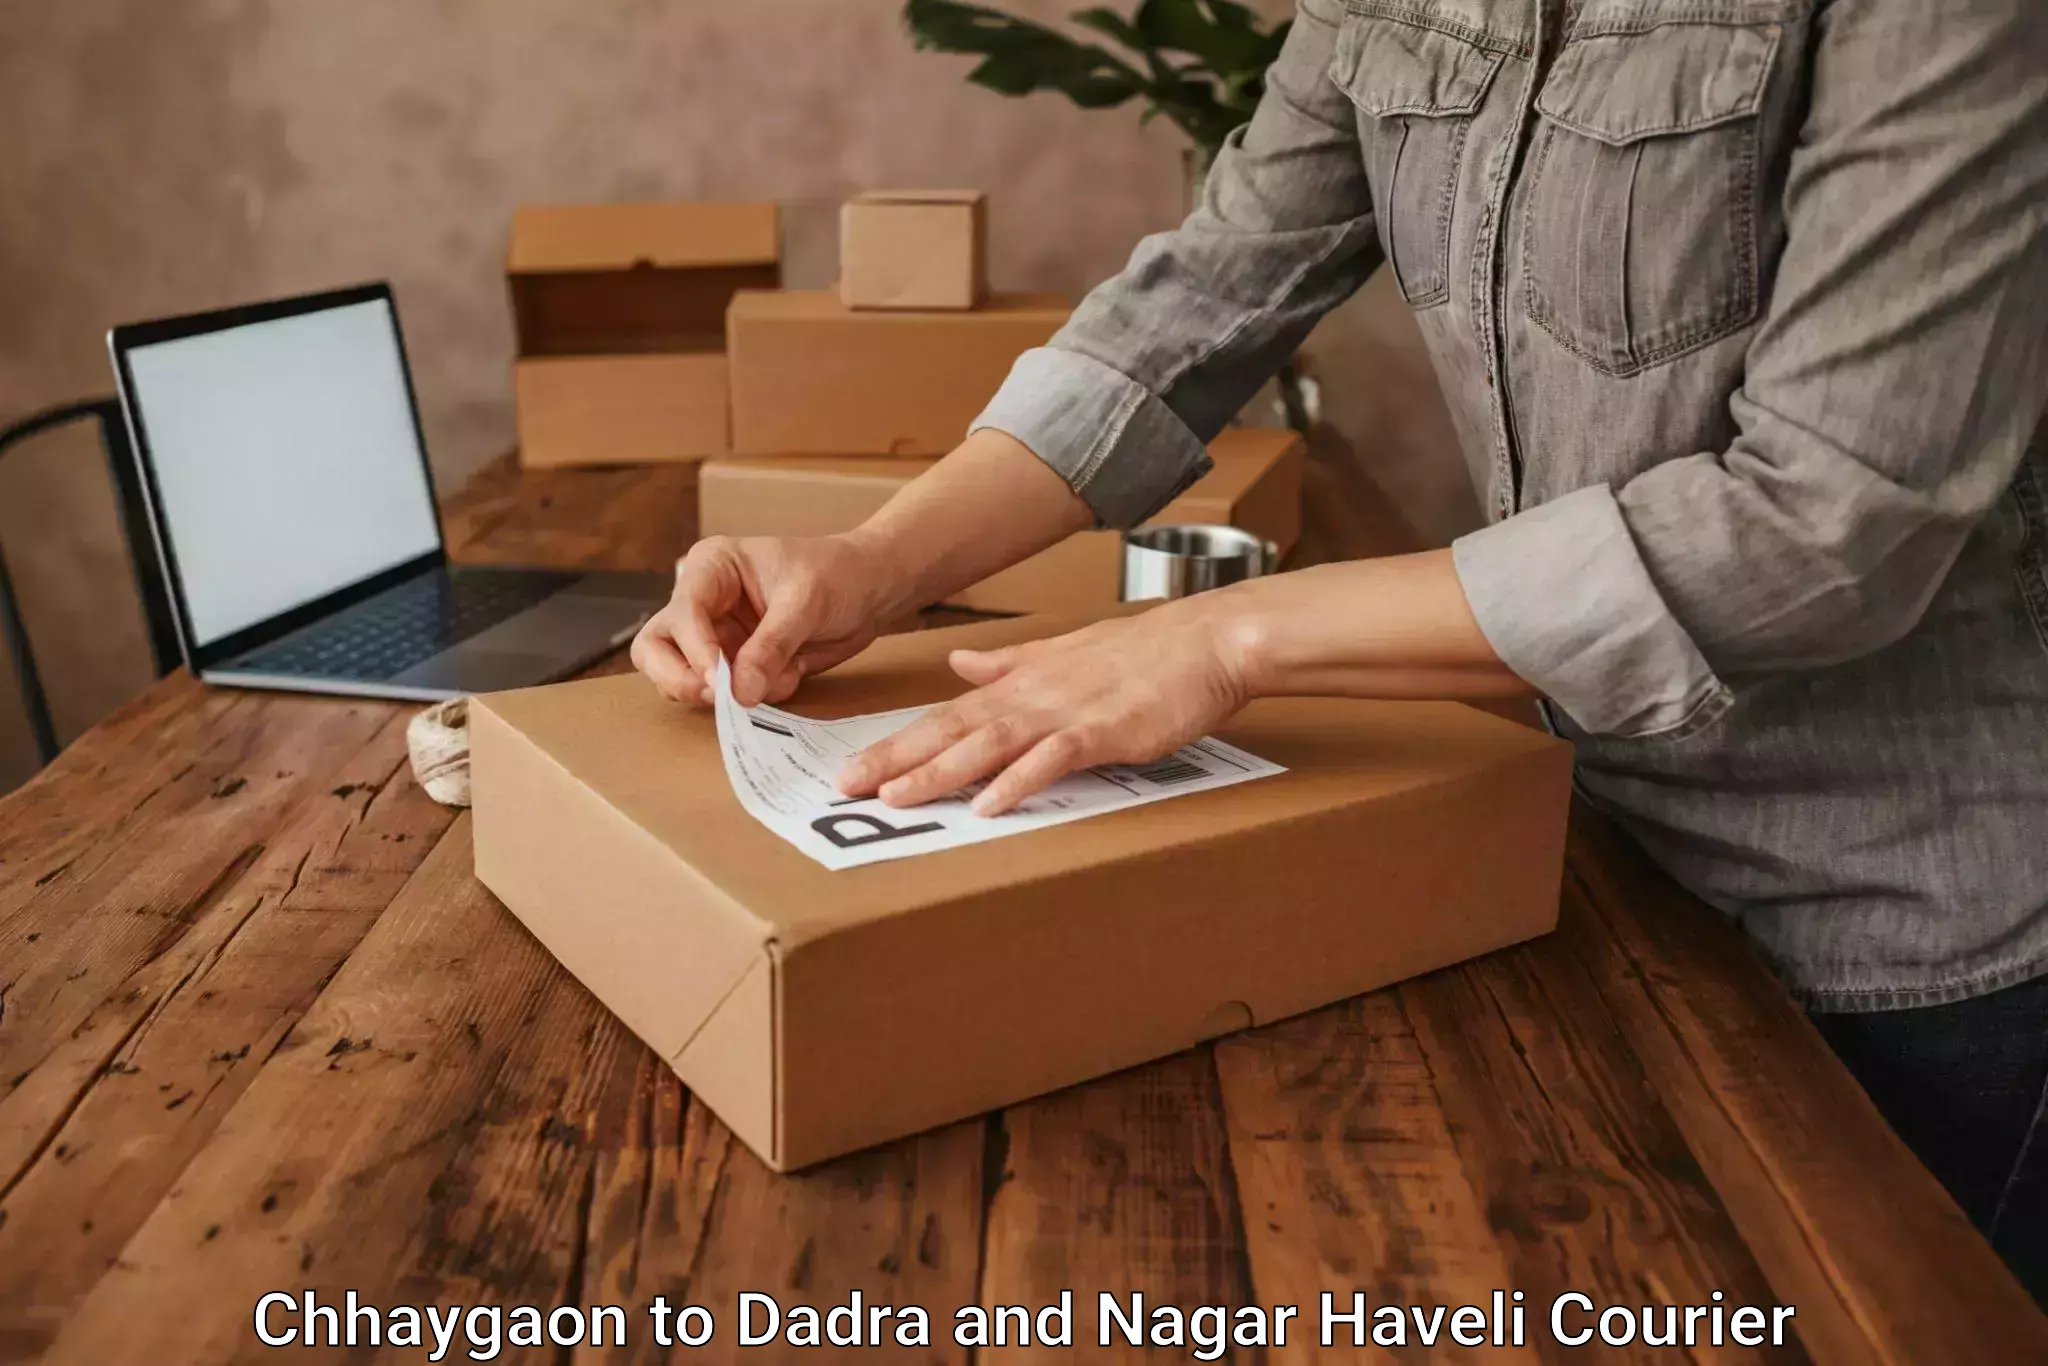 Courier service booking Chhaygaon to Dadra and Nagar Haveli